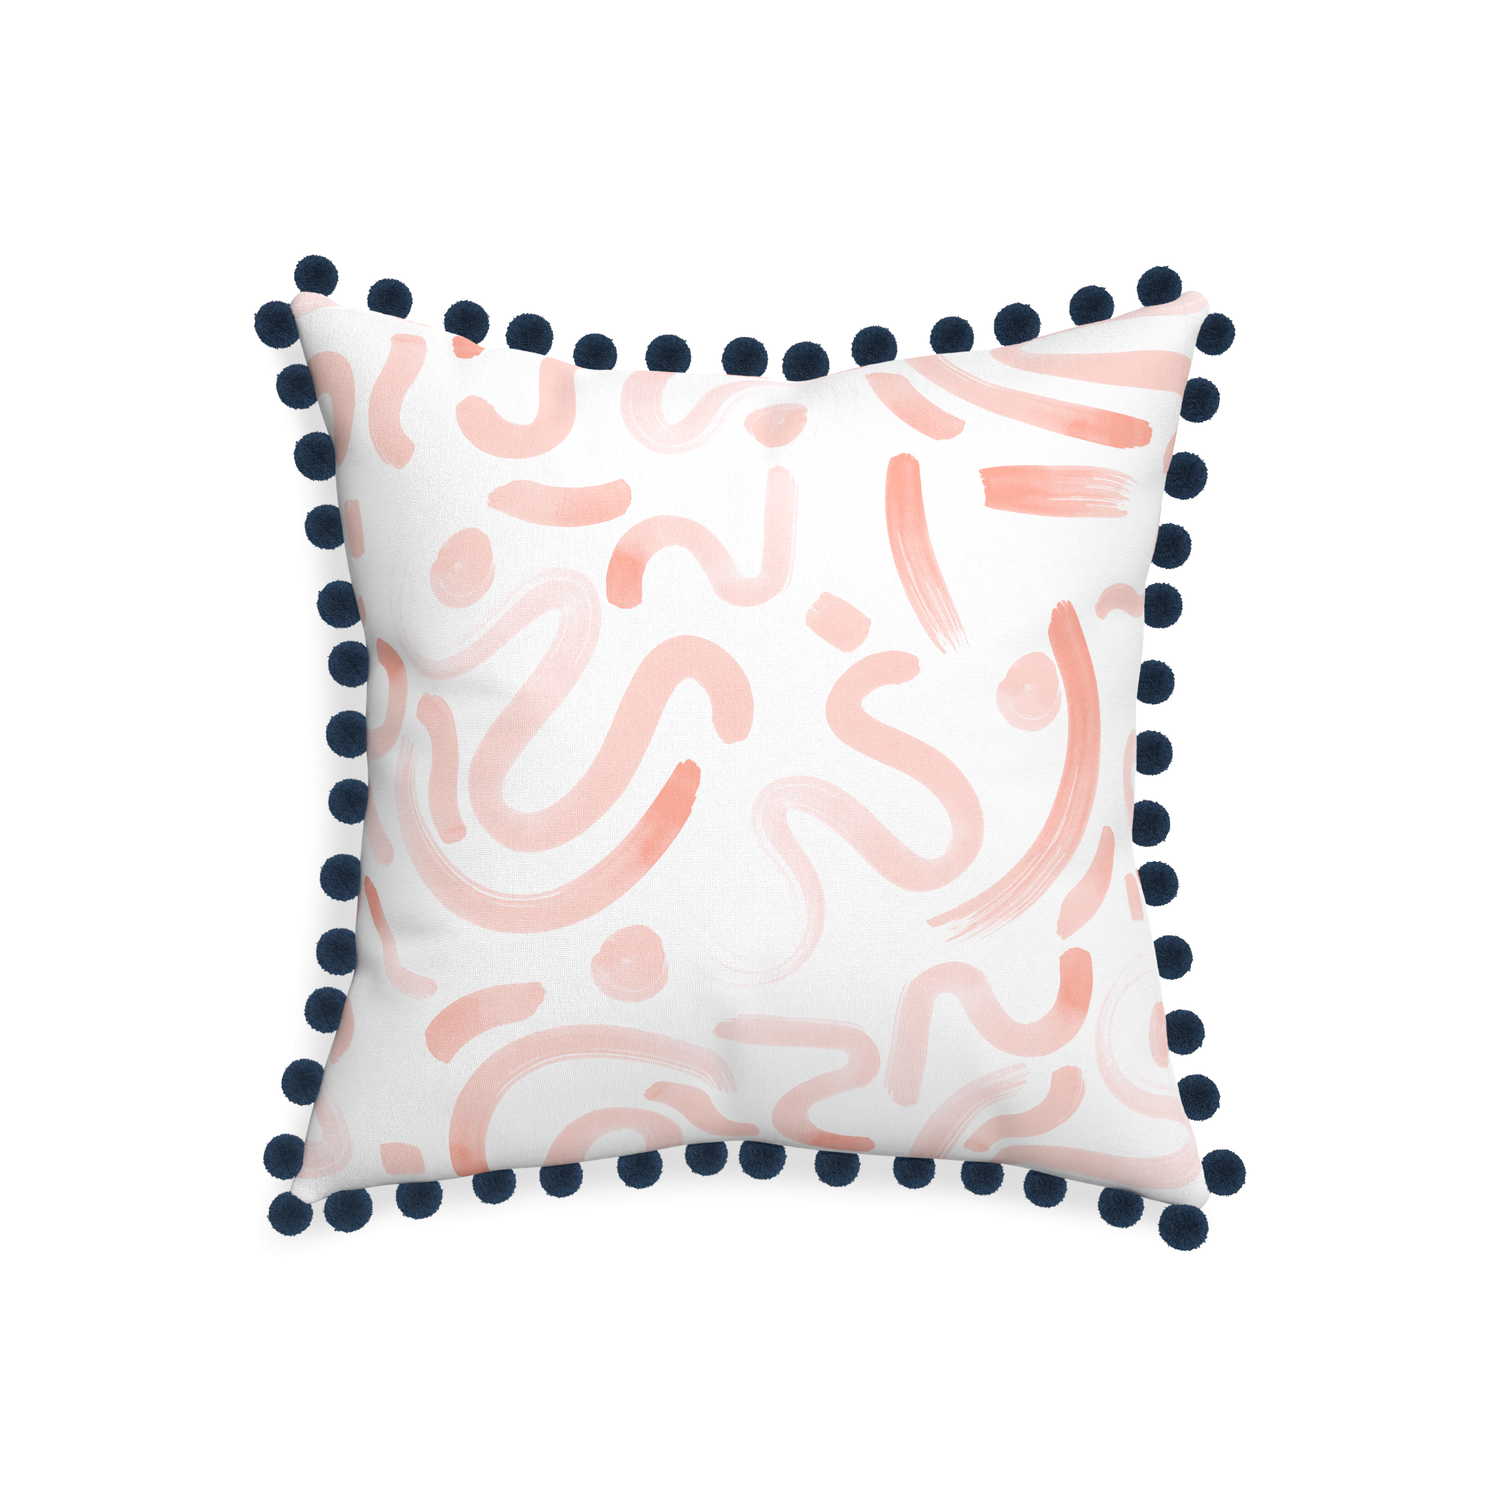 20-square hockney pink custom pink graphicpillow with c on white background